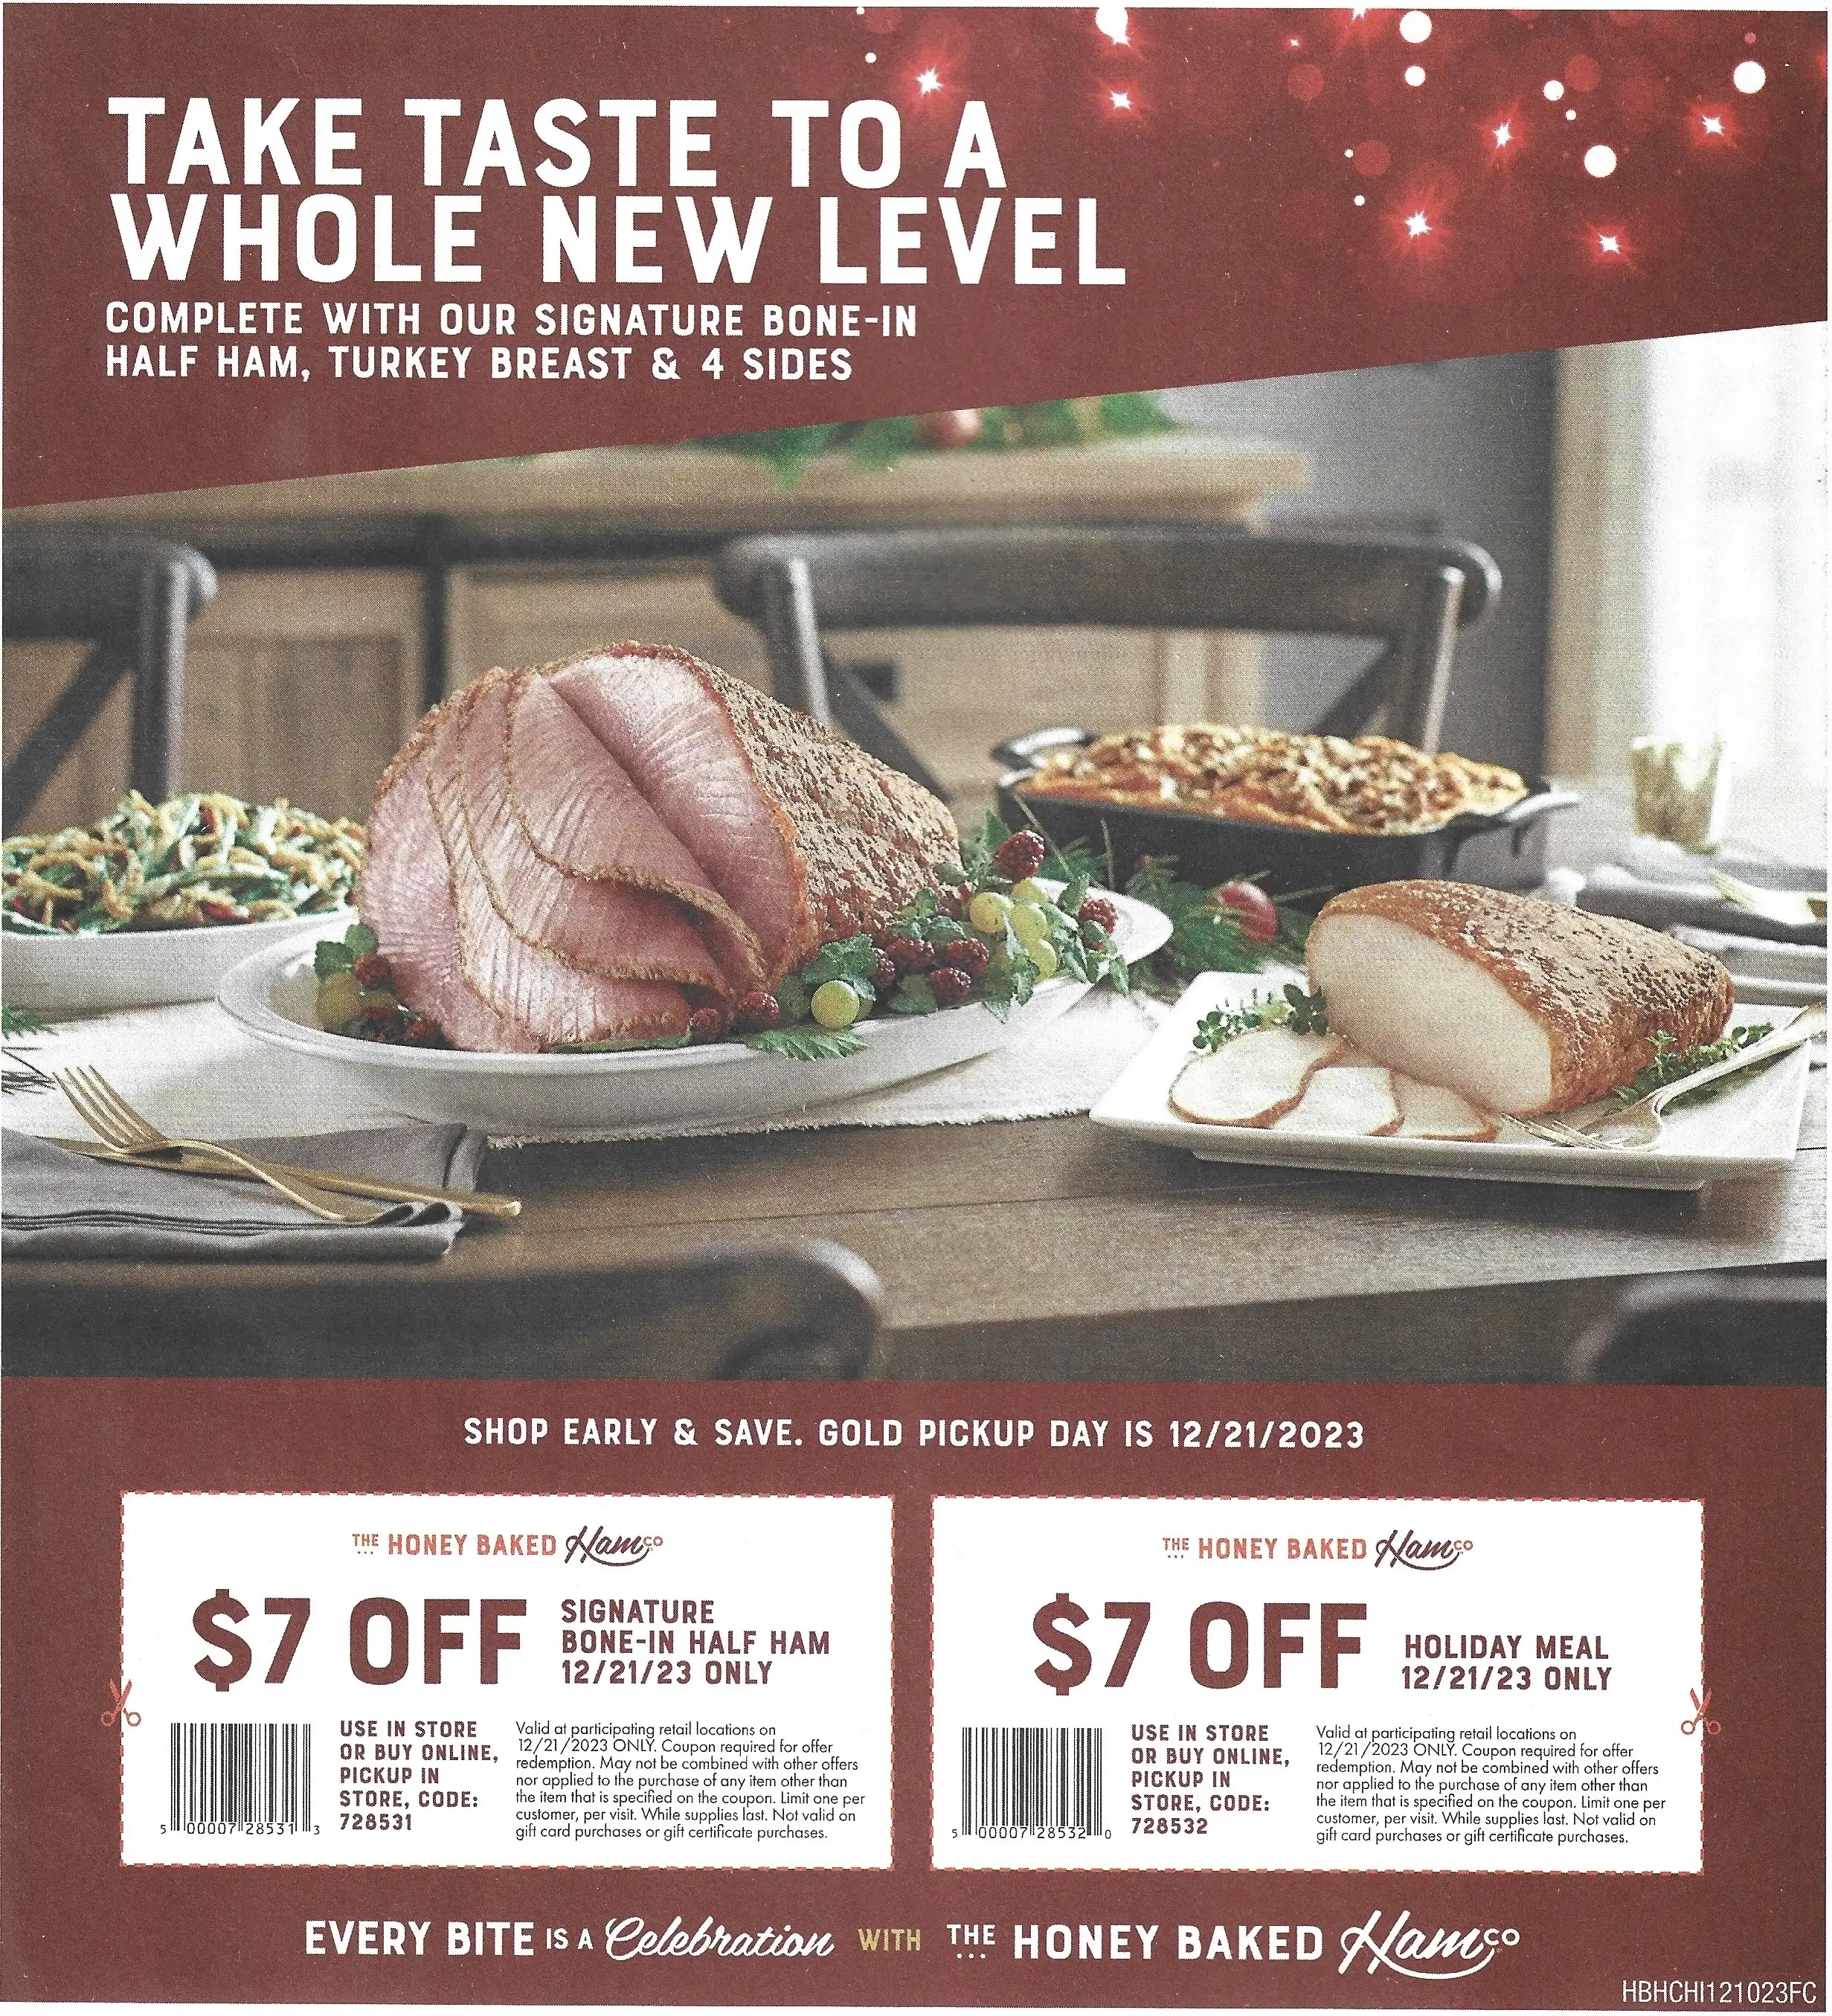 The Honey Baked Ham Company Coupons - Expires 12/21/2023